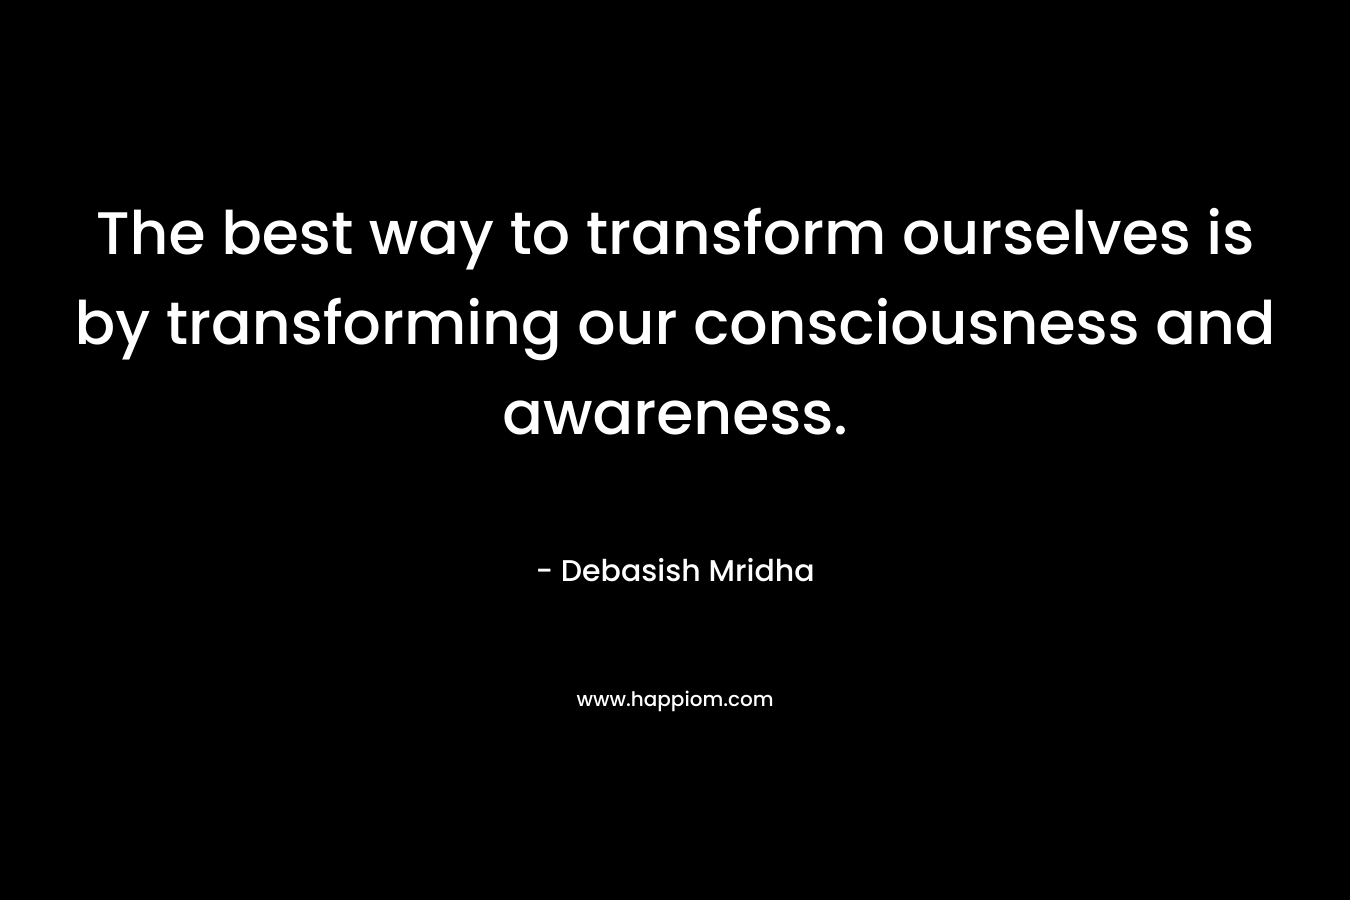 The best way to transform ourselves is by transforming our consciousness and awareness.